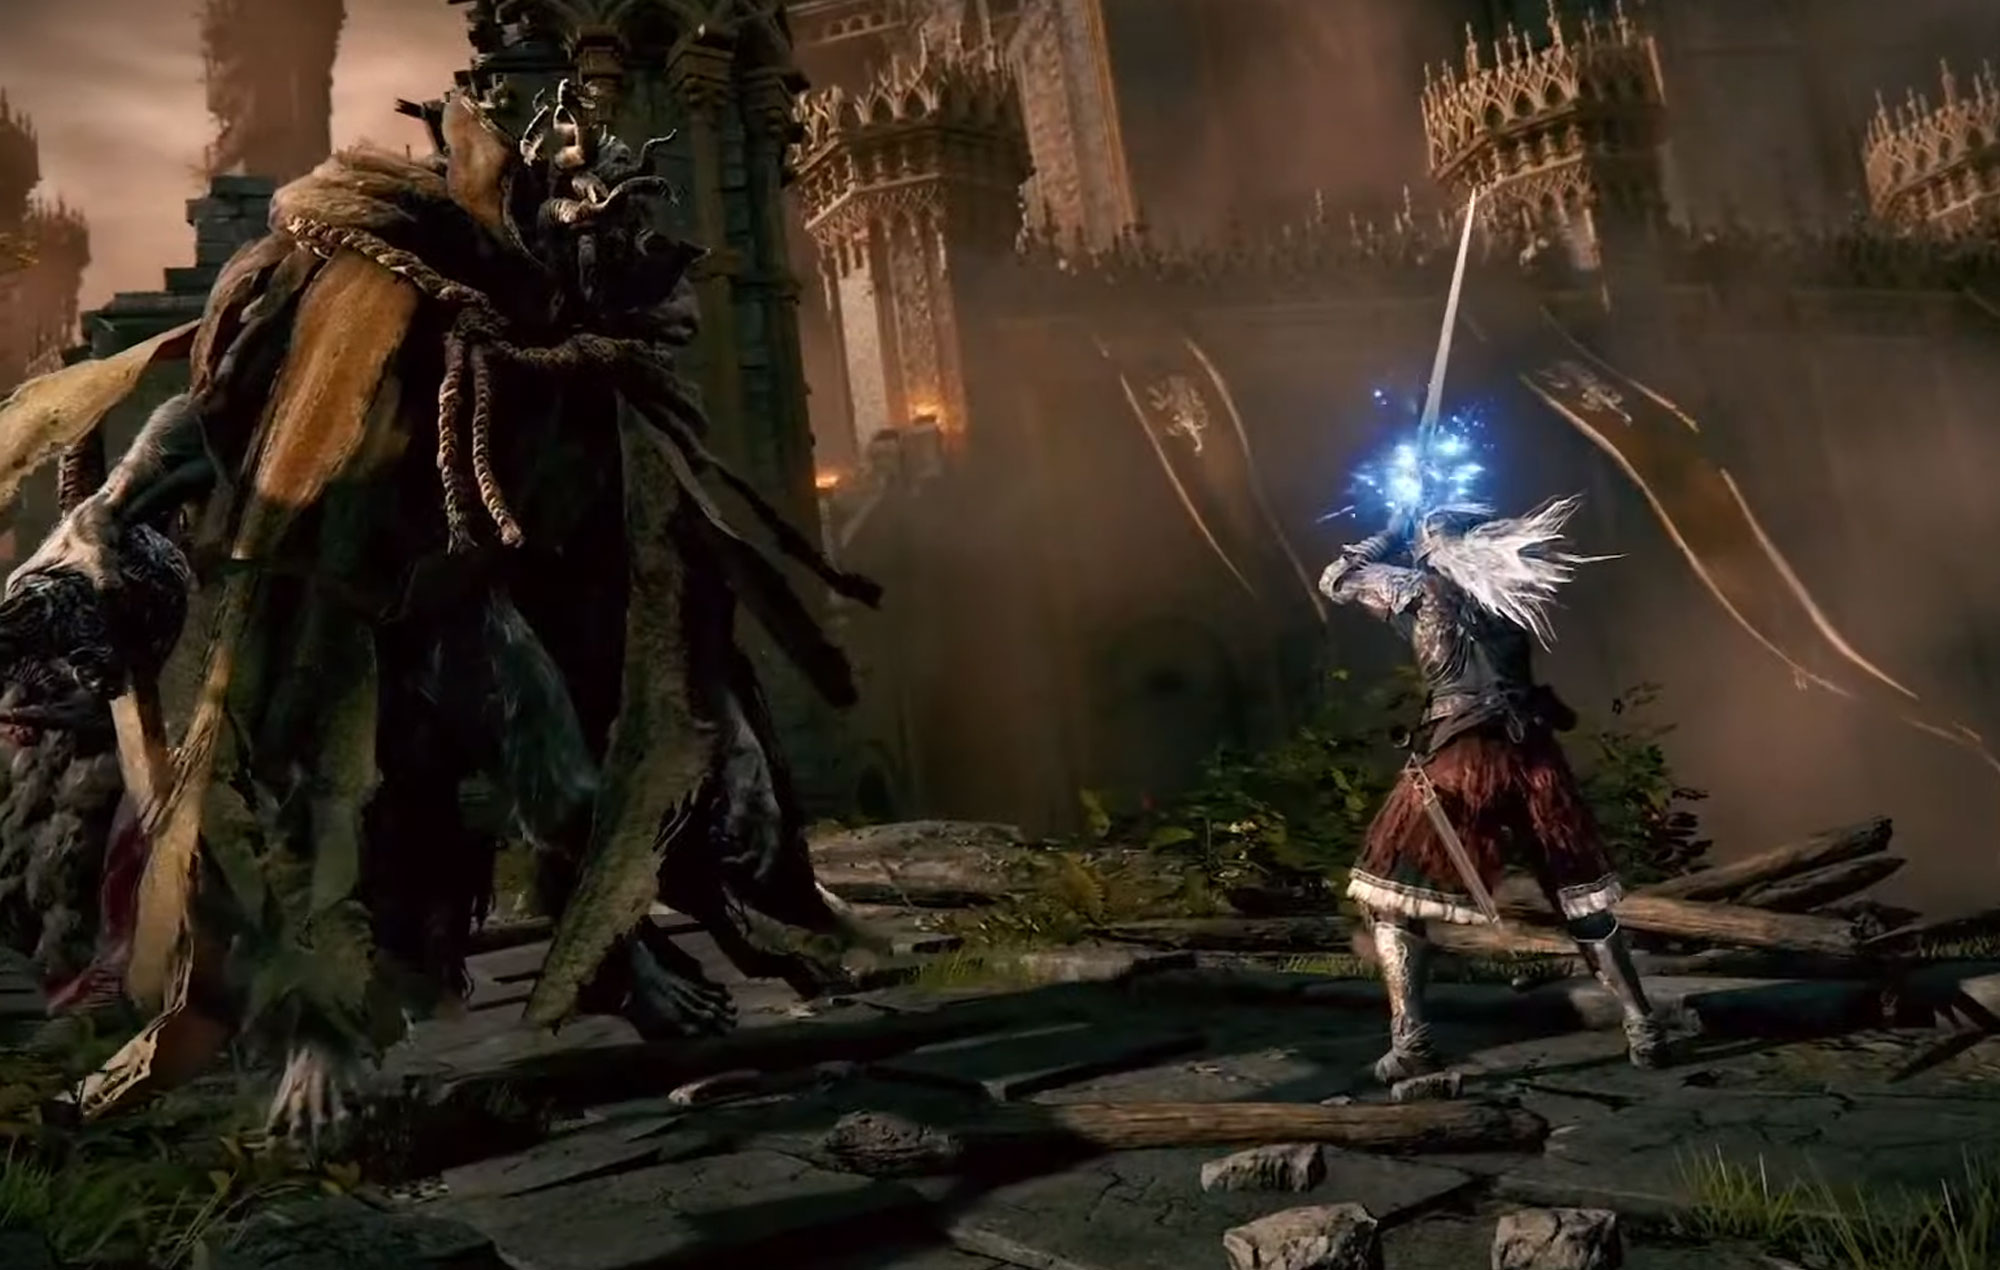 Elden Ring' reveals gameplay footage and release date